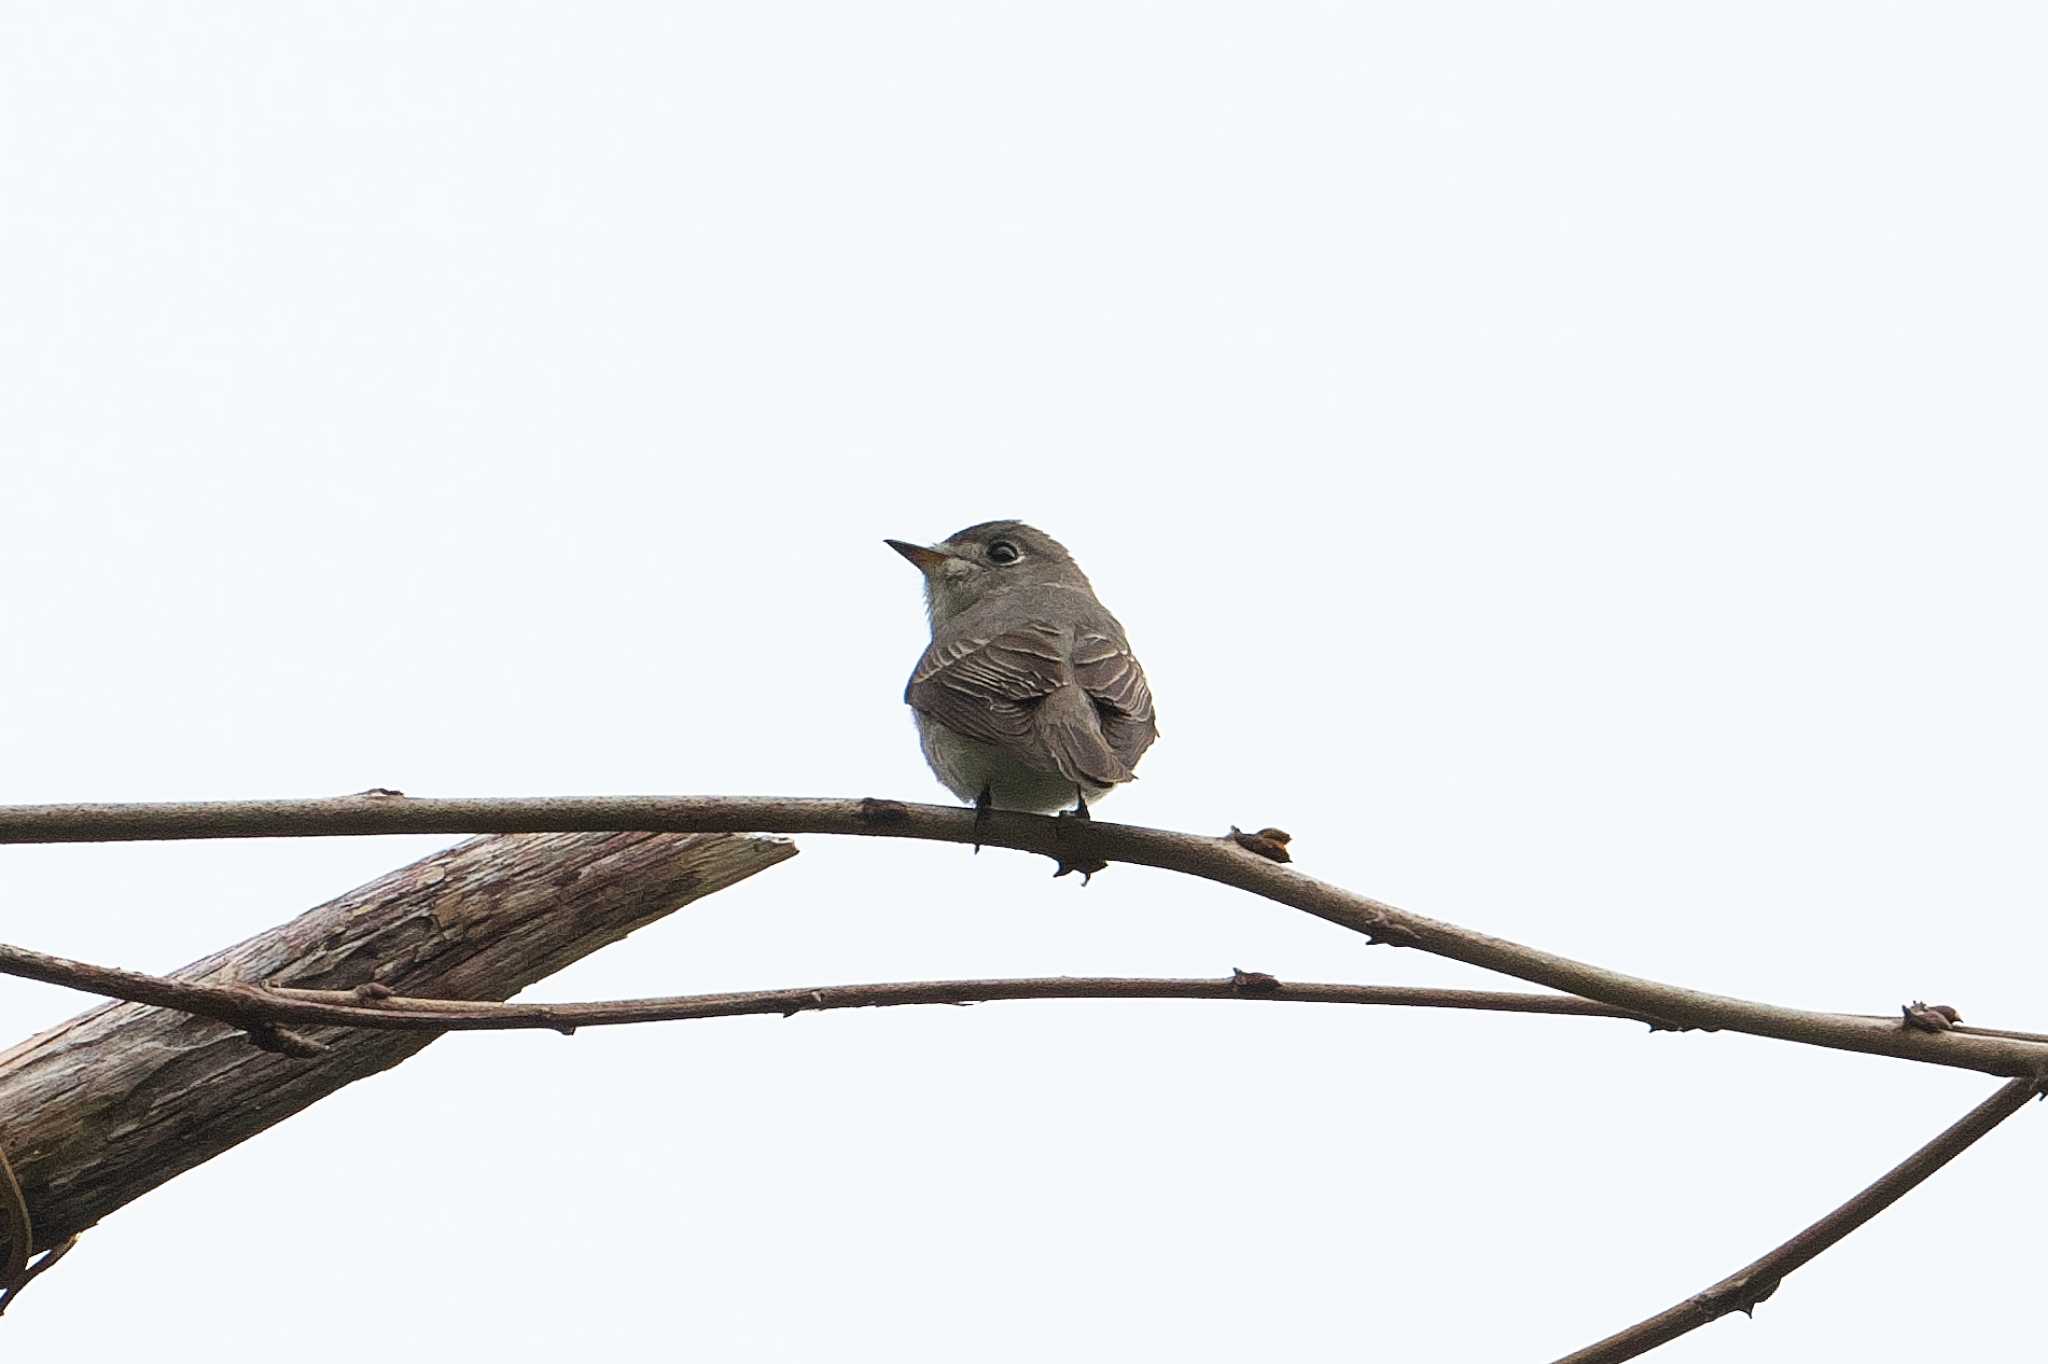 Photo of Asian Brown Flycatcher at 神奈川県自然環境保全センター by Y. Watanabe